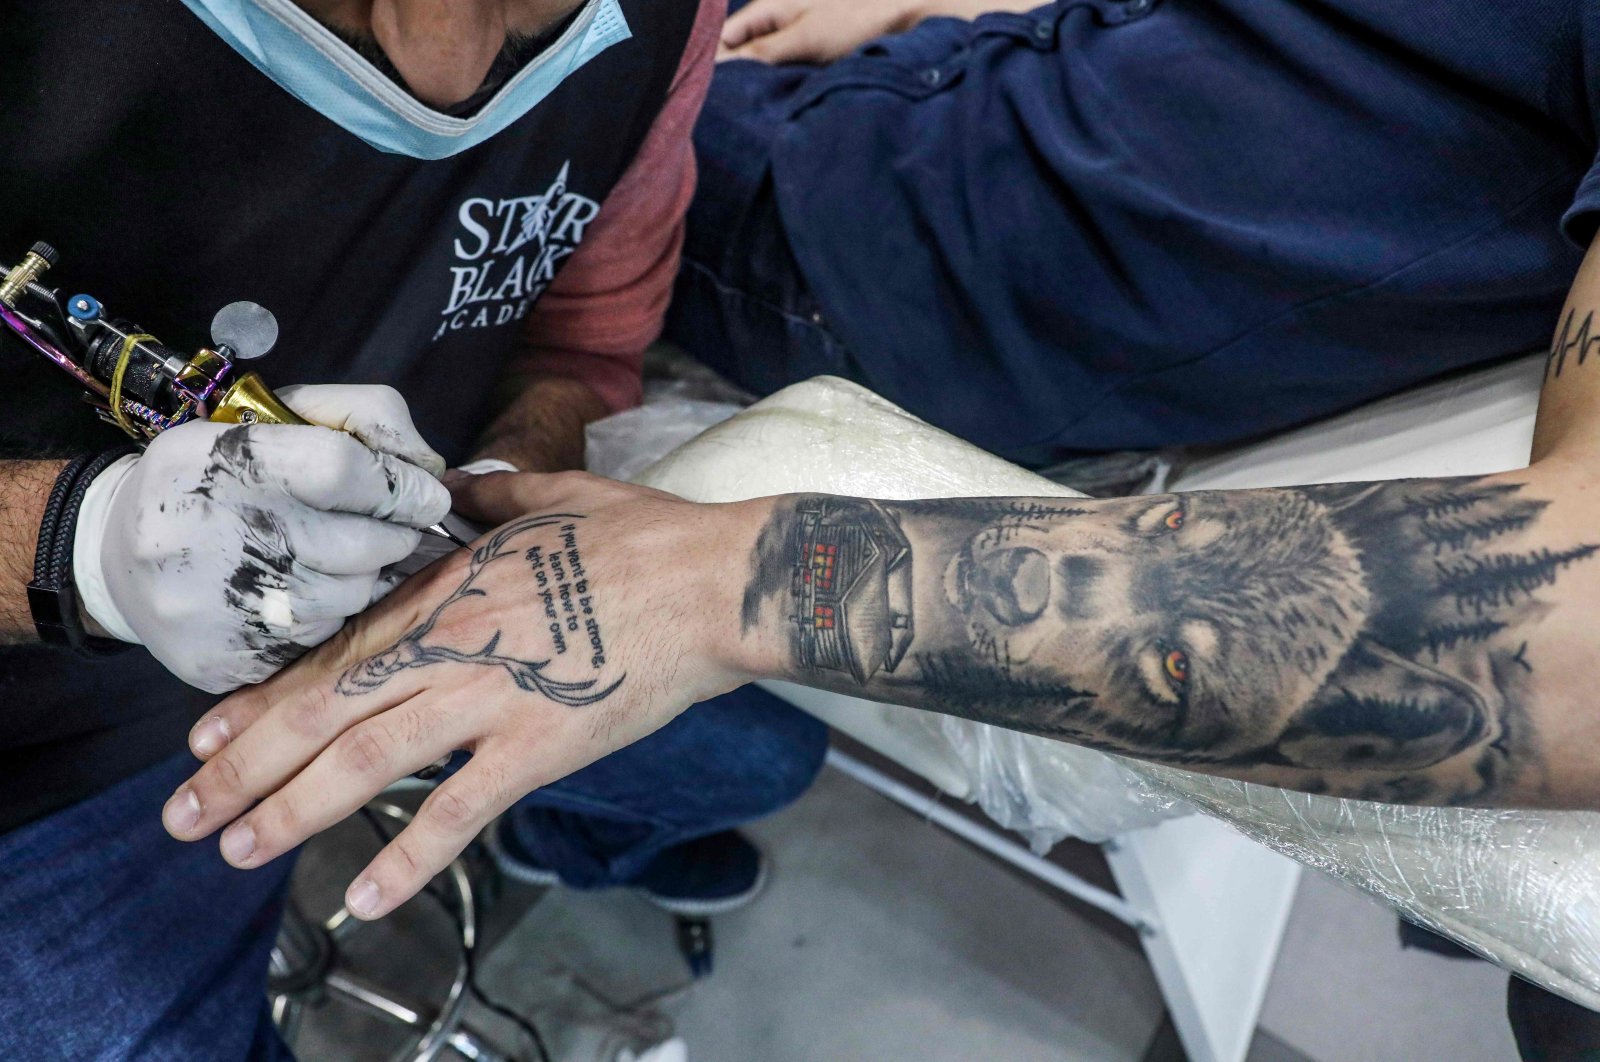 A tattoo artist applies a tattoo design of a stag's face with the English motto "if you want to be strong, learn to fight on your own" at his parlour in the city of Hebron in the occupied West Bank, on Jan 24, 2021. (AFP)